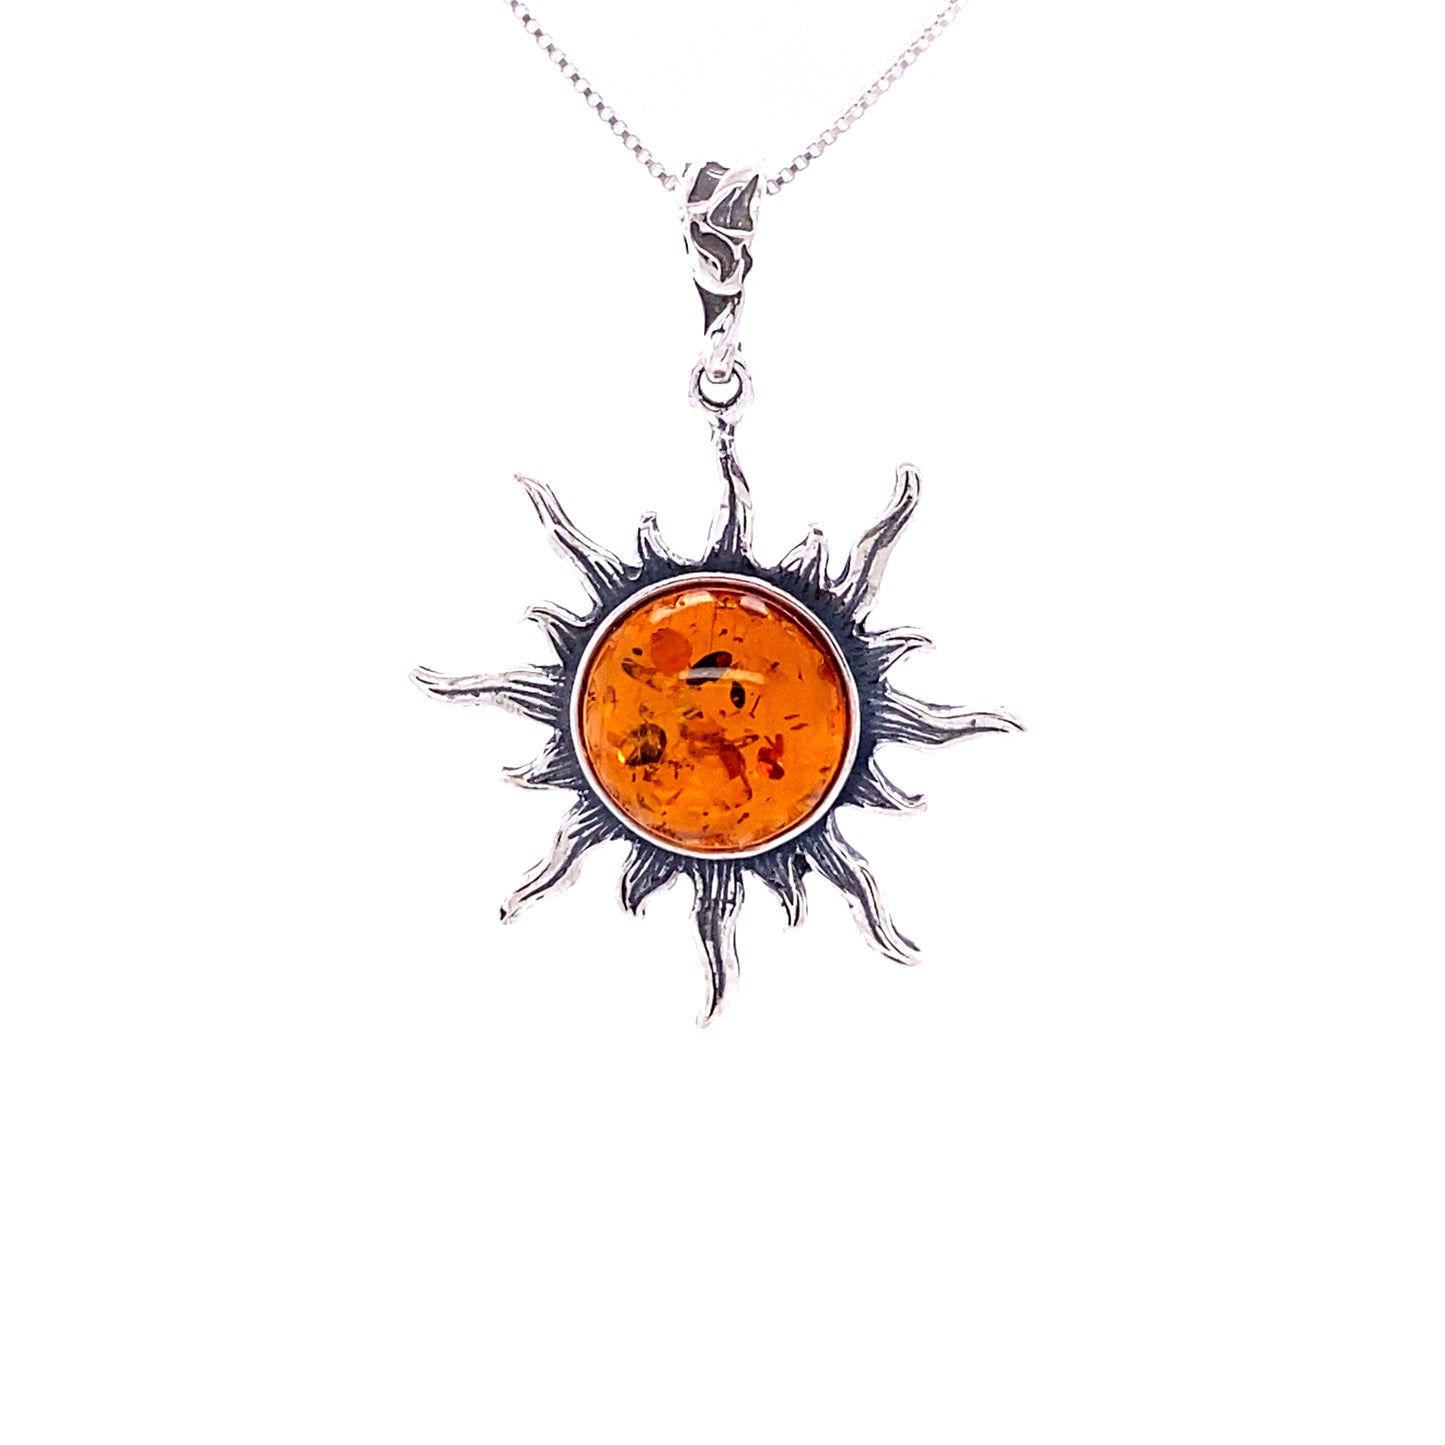 A necklace with a Radiant Amber Sun Pendant on a Super Silver chain.